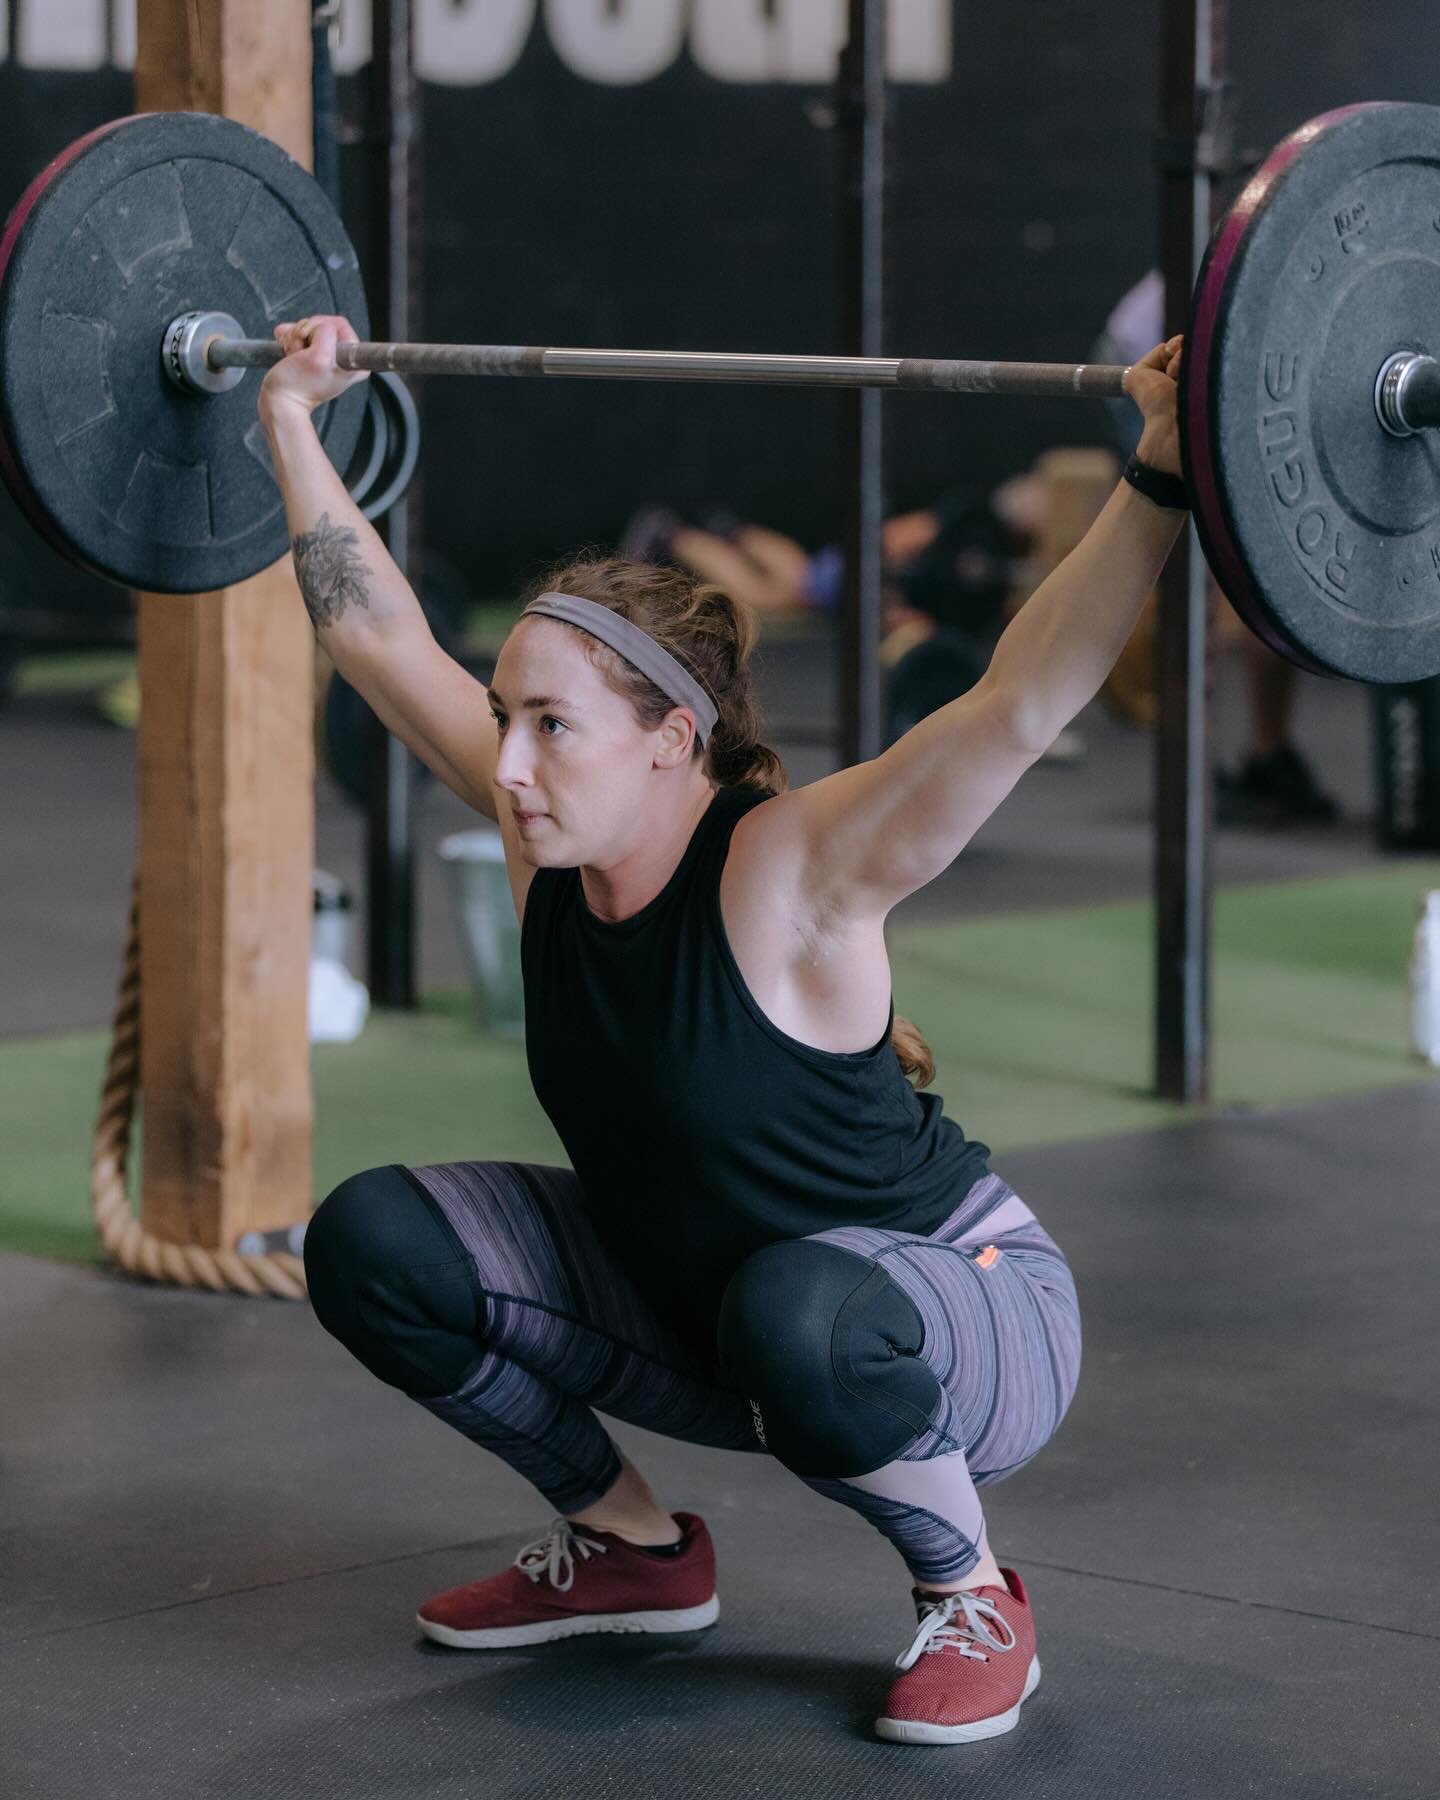 CrossFit is not a specialized fitness program but a deliberate attempt to optimize physical competence in each of ten recognized fitness domains.

Endurance
Stamina
Strength
Flexibility
Speed
Power
Coordination
Agility
Balance
Accuracy

#CrossFitInde